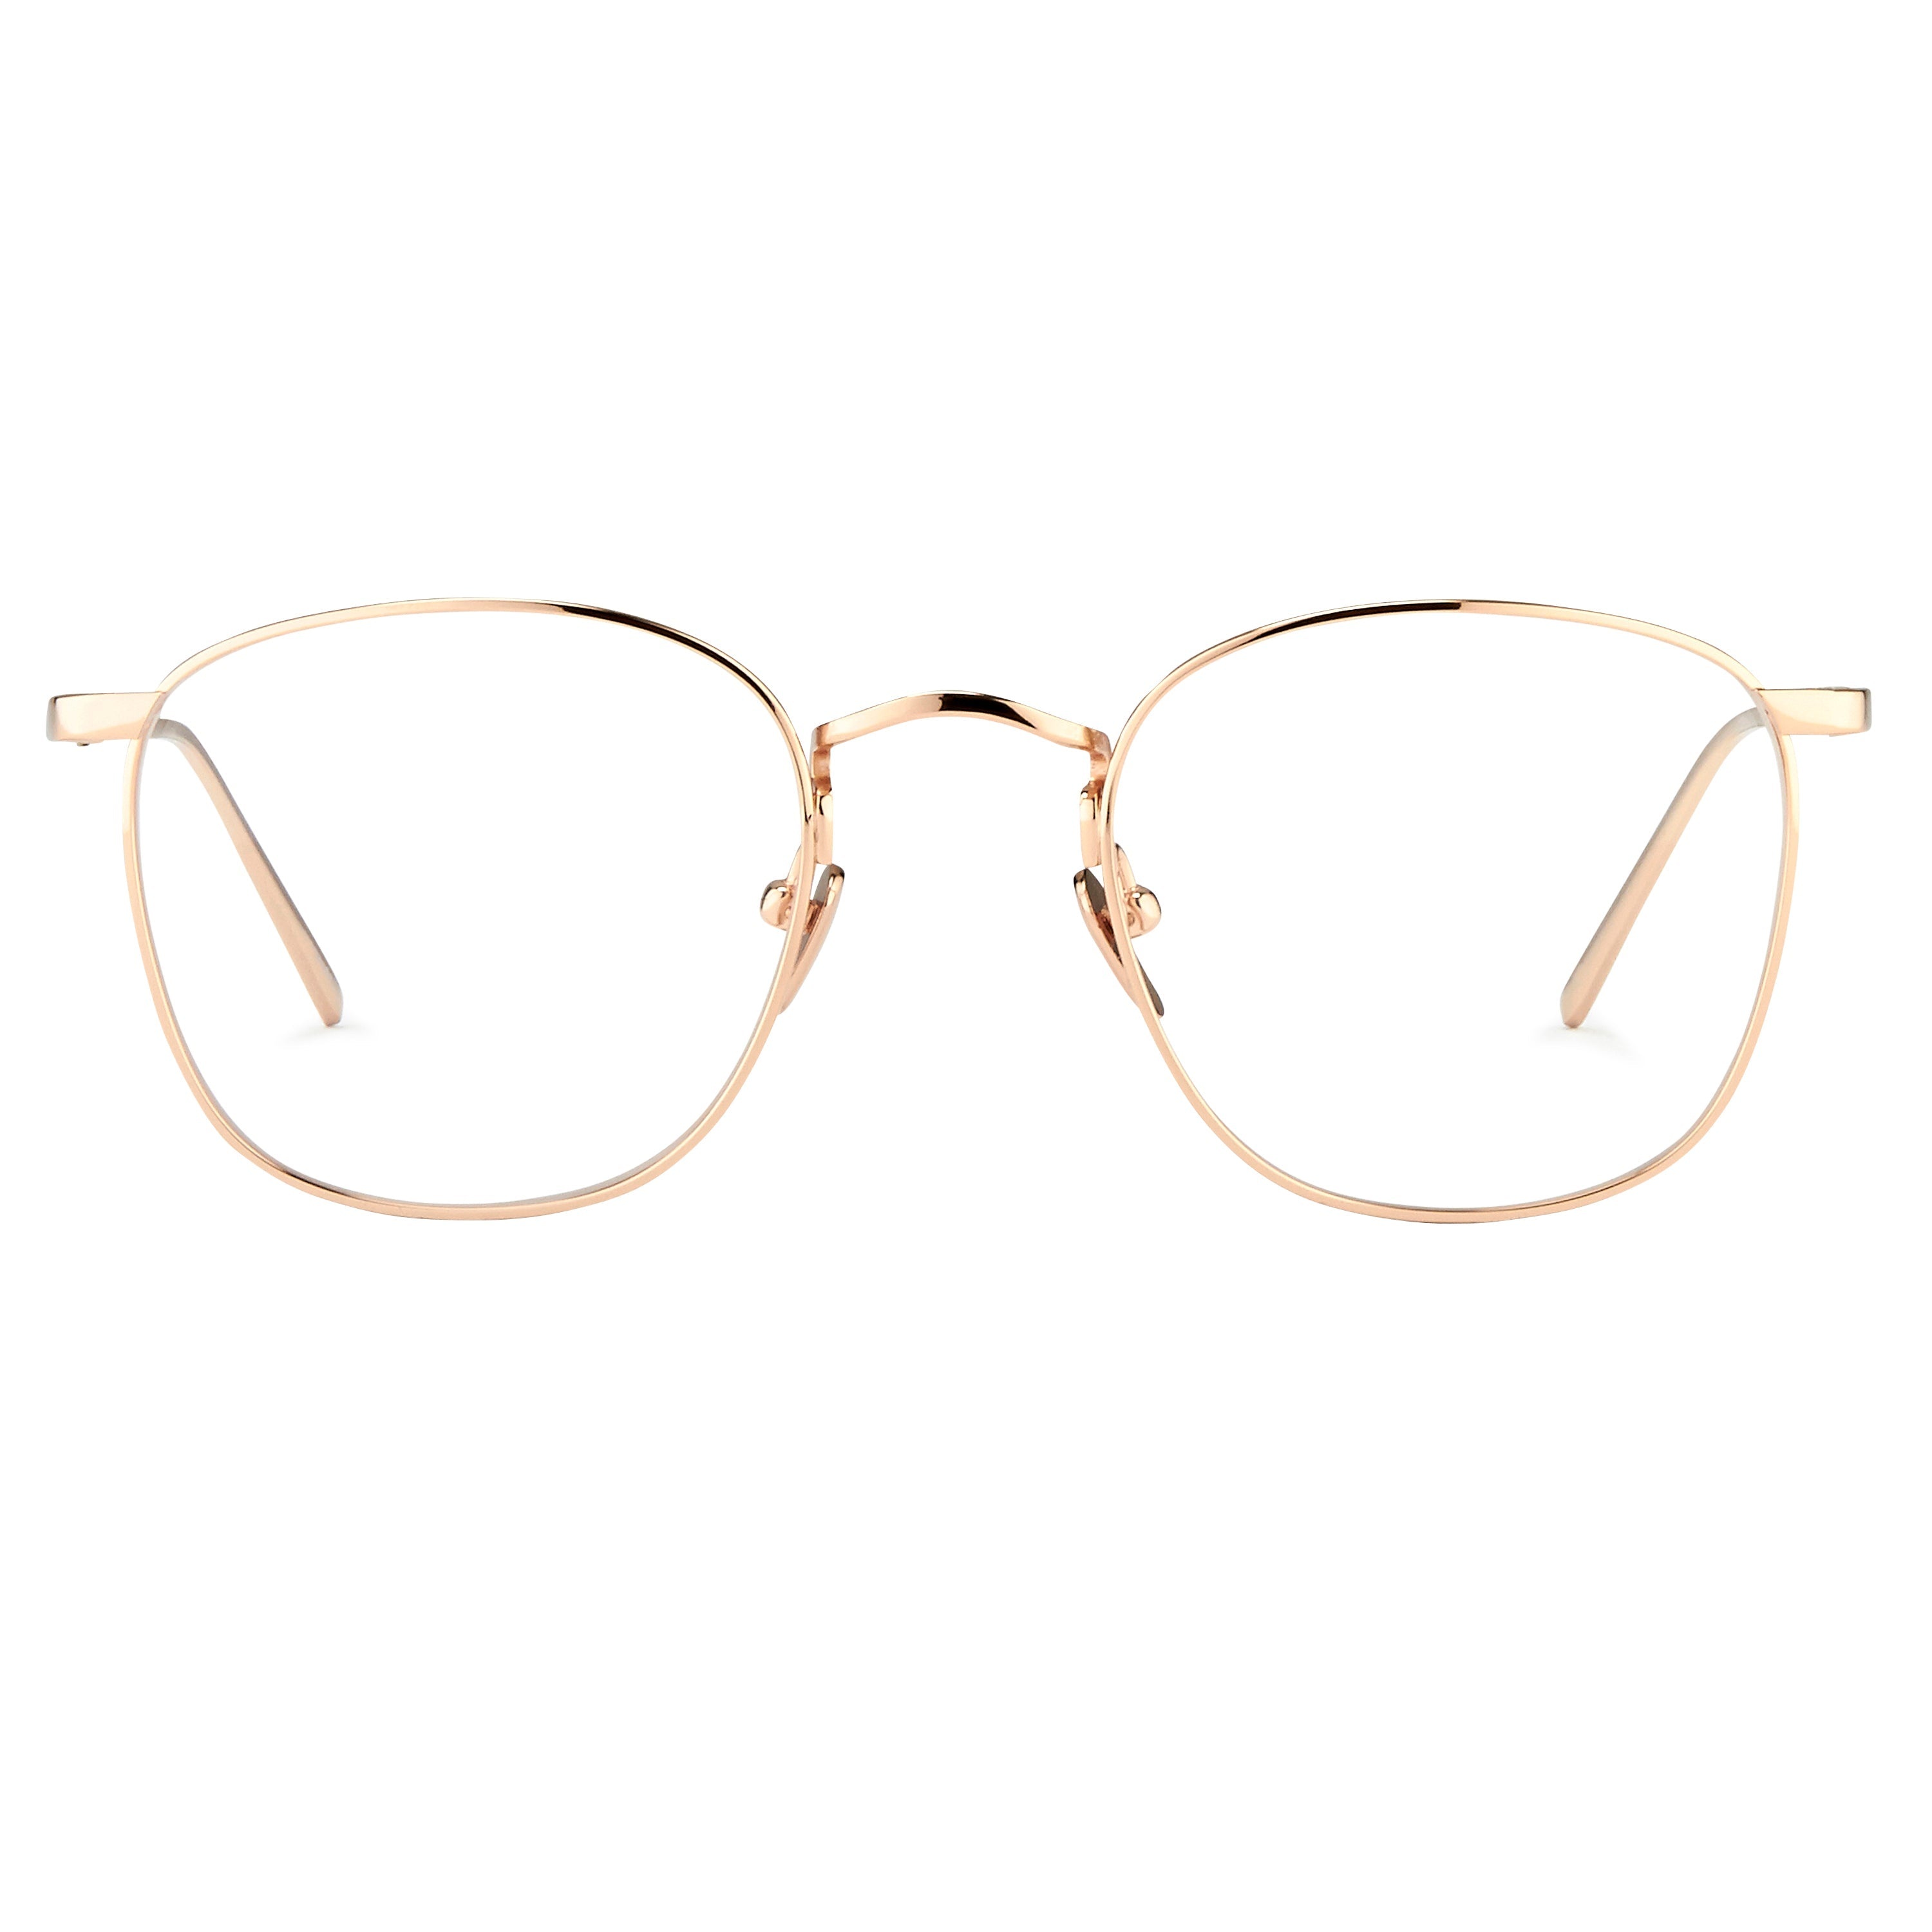 THE SIMON | SQUARE OPTICAL FRAME IN ROSE GOLD (C8) - 1